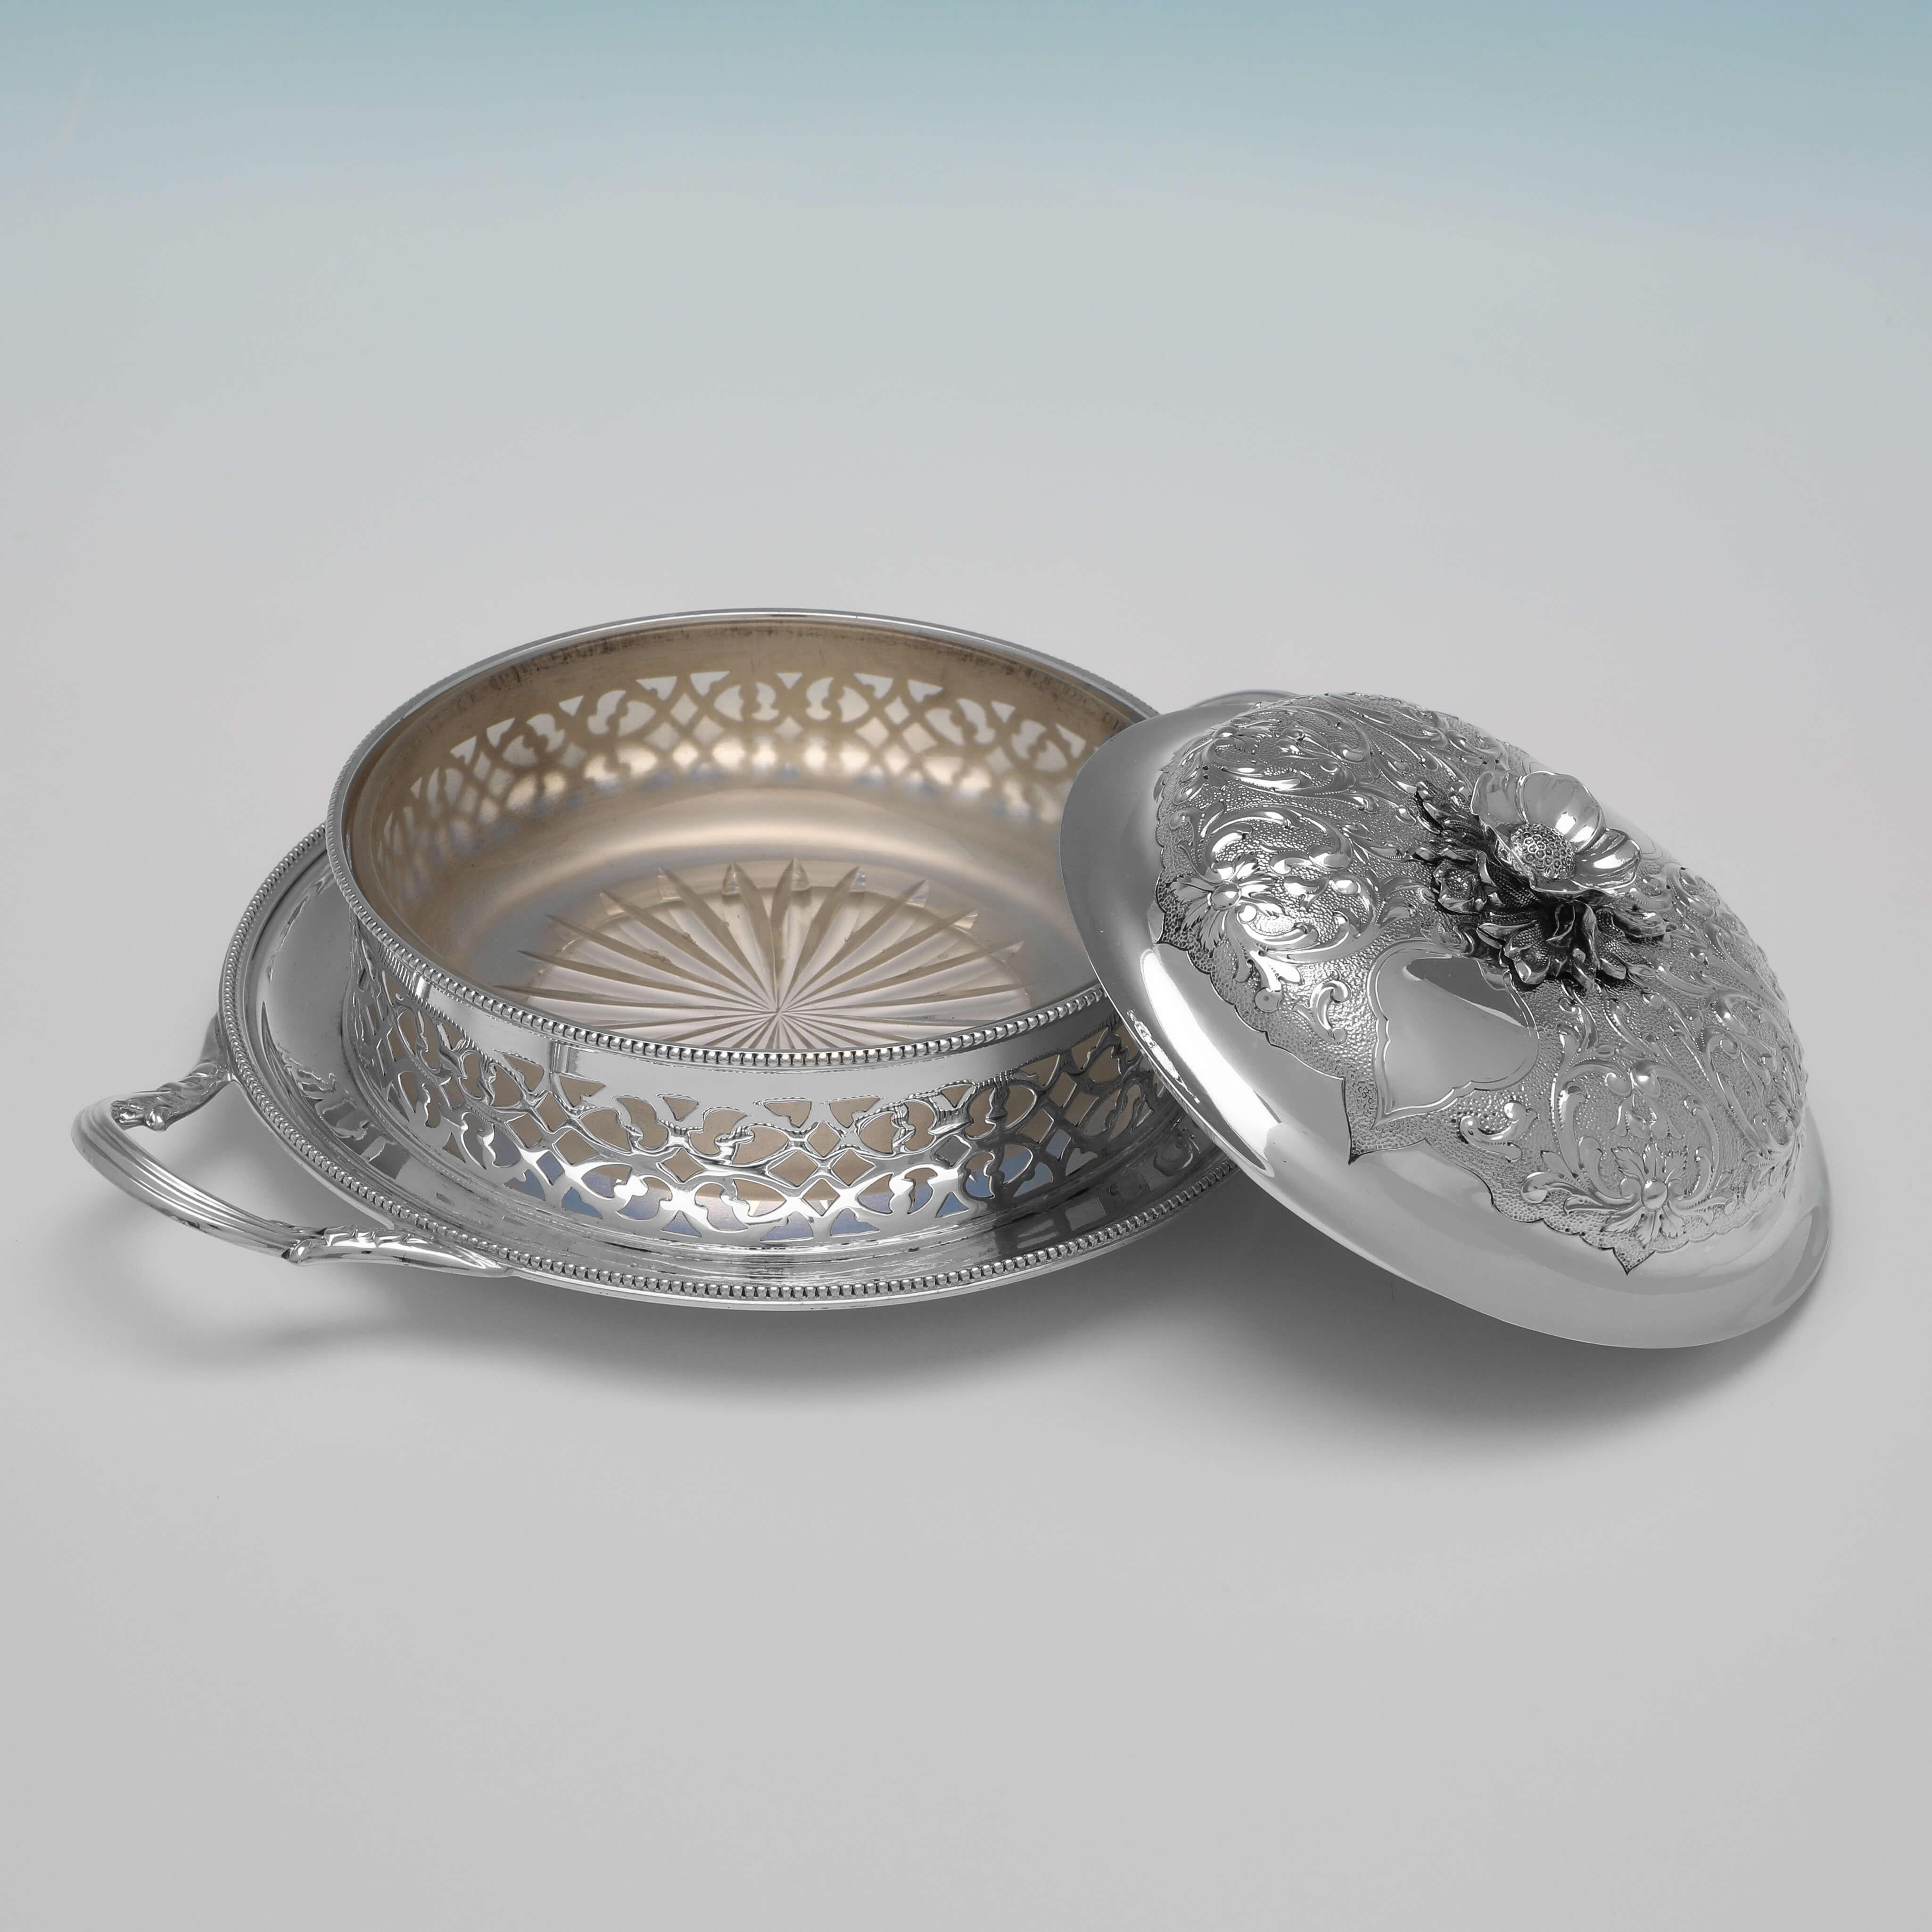 Hallmarked in Sheffield in 1865 by Henry Wilkinson & Co., this attractive, Victorian, Antique Sterling Silver Butter Dish, features pierced sides, a glass liner, and an ornate lid. 

The butter dish measures 3